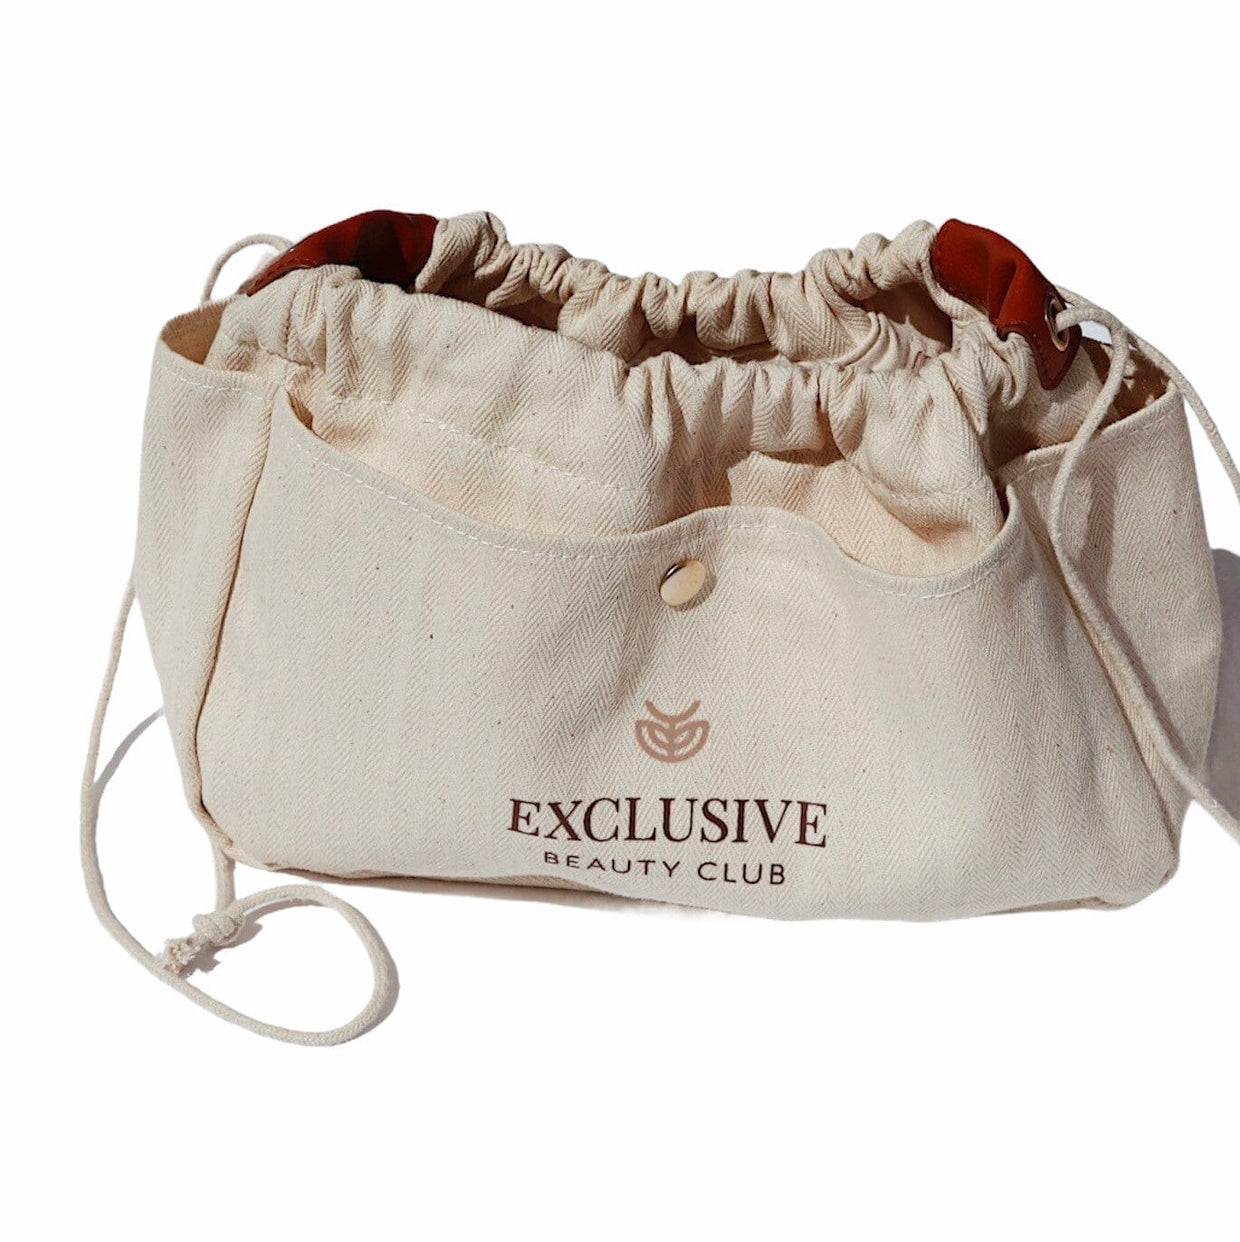 Exclusive Beauty Club Cosmetic Bag Exclusive Beauty Club Shop at Exclusive Beauty Club